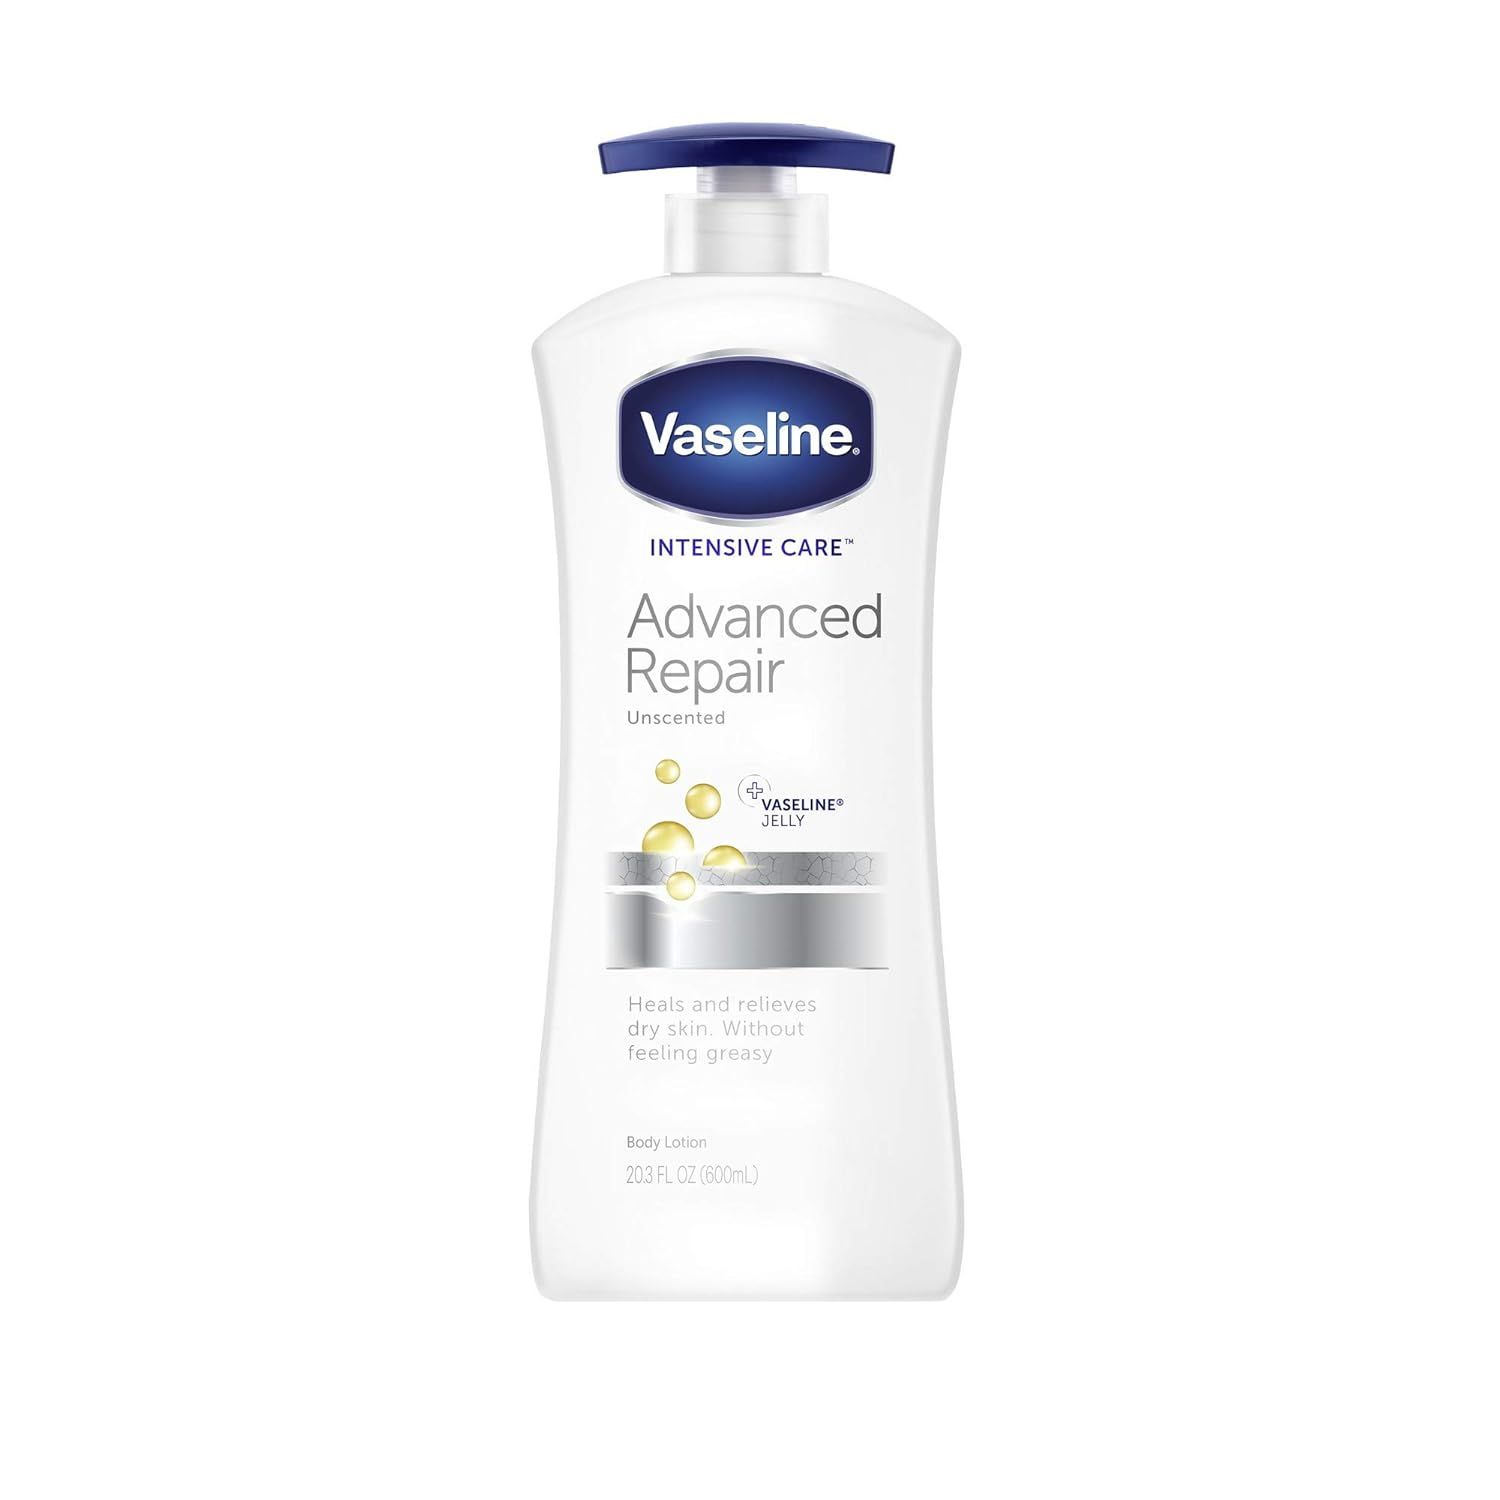 Vaseline Intensive Care Advanced Repair Unscented Body Lotion, 20.3 Fl Oz (Pack of 3) | Amazon (US)